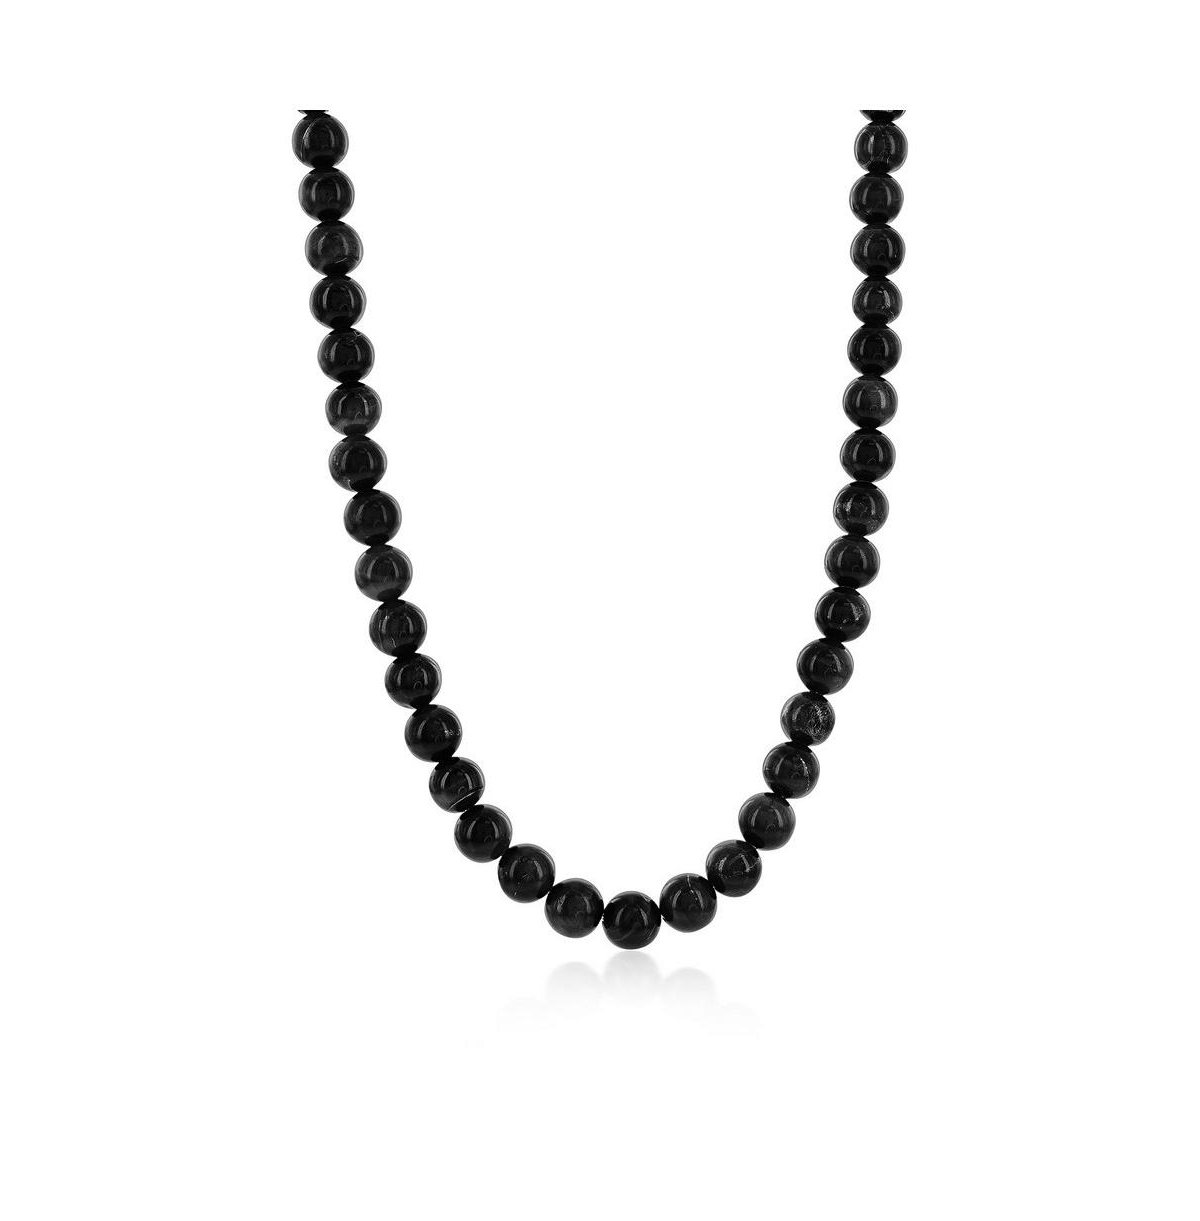 Stainless Steel 8mm Natural Stone Bead Necklace - Onyx